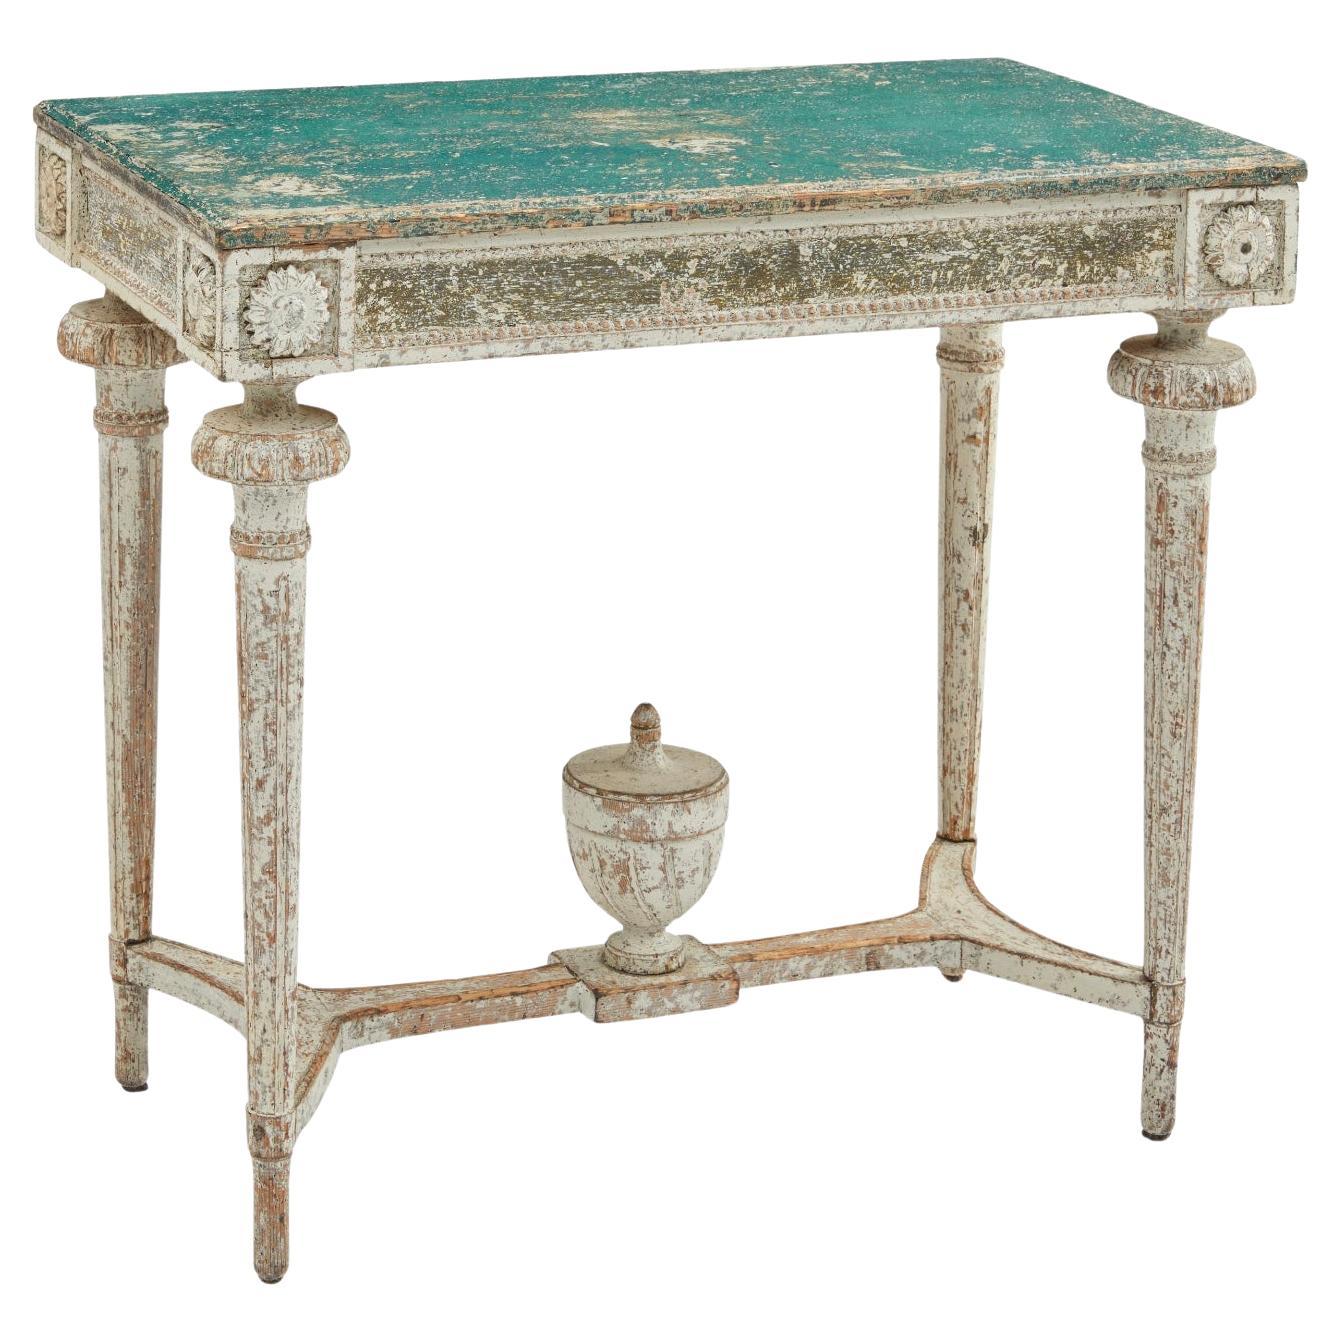 Early 19th Century Swedish Gustavian Console Table